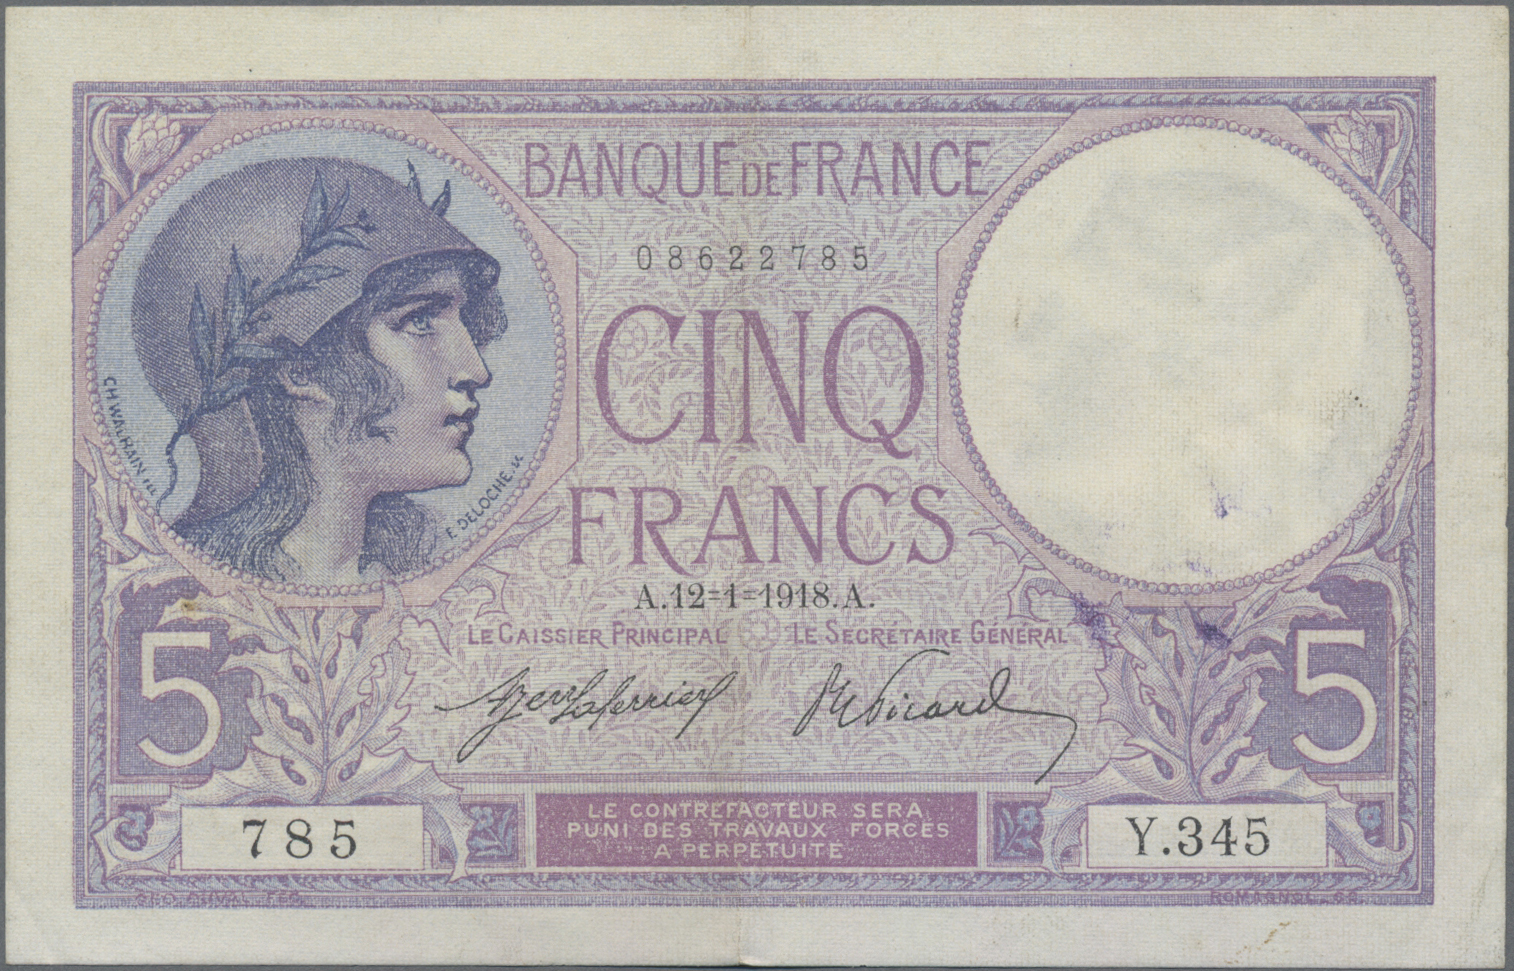 Lot 00389 - France / Frankreich | Banknoten  -  Auktionshaus Christoph Gärtner GmbH & Co. KG 54th AUCTION - Day 1 Coins & Banknotes